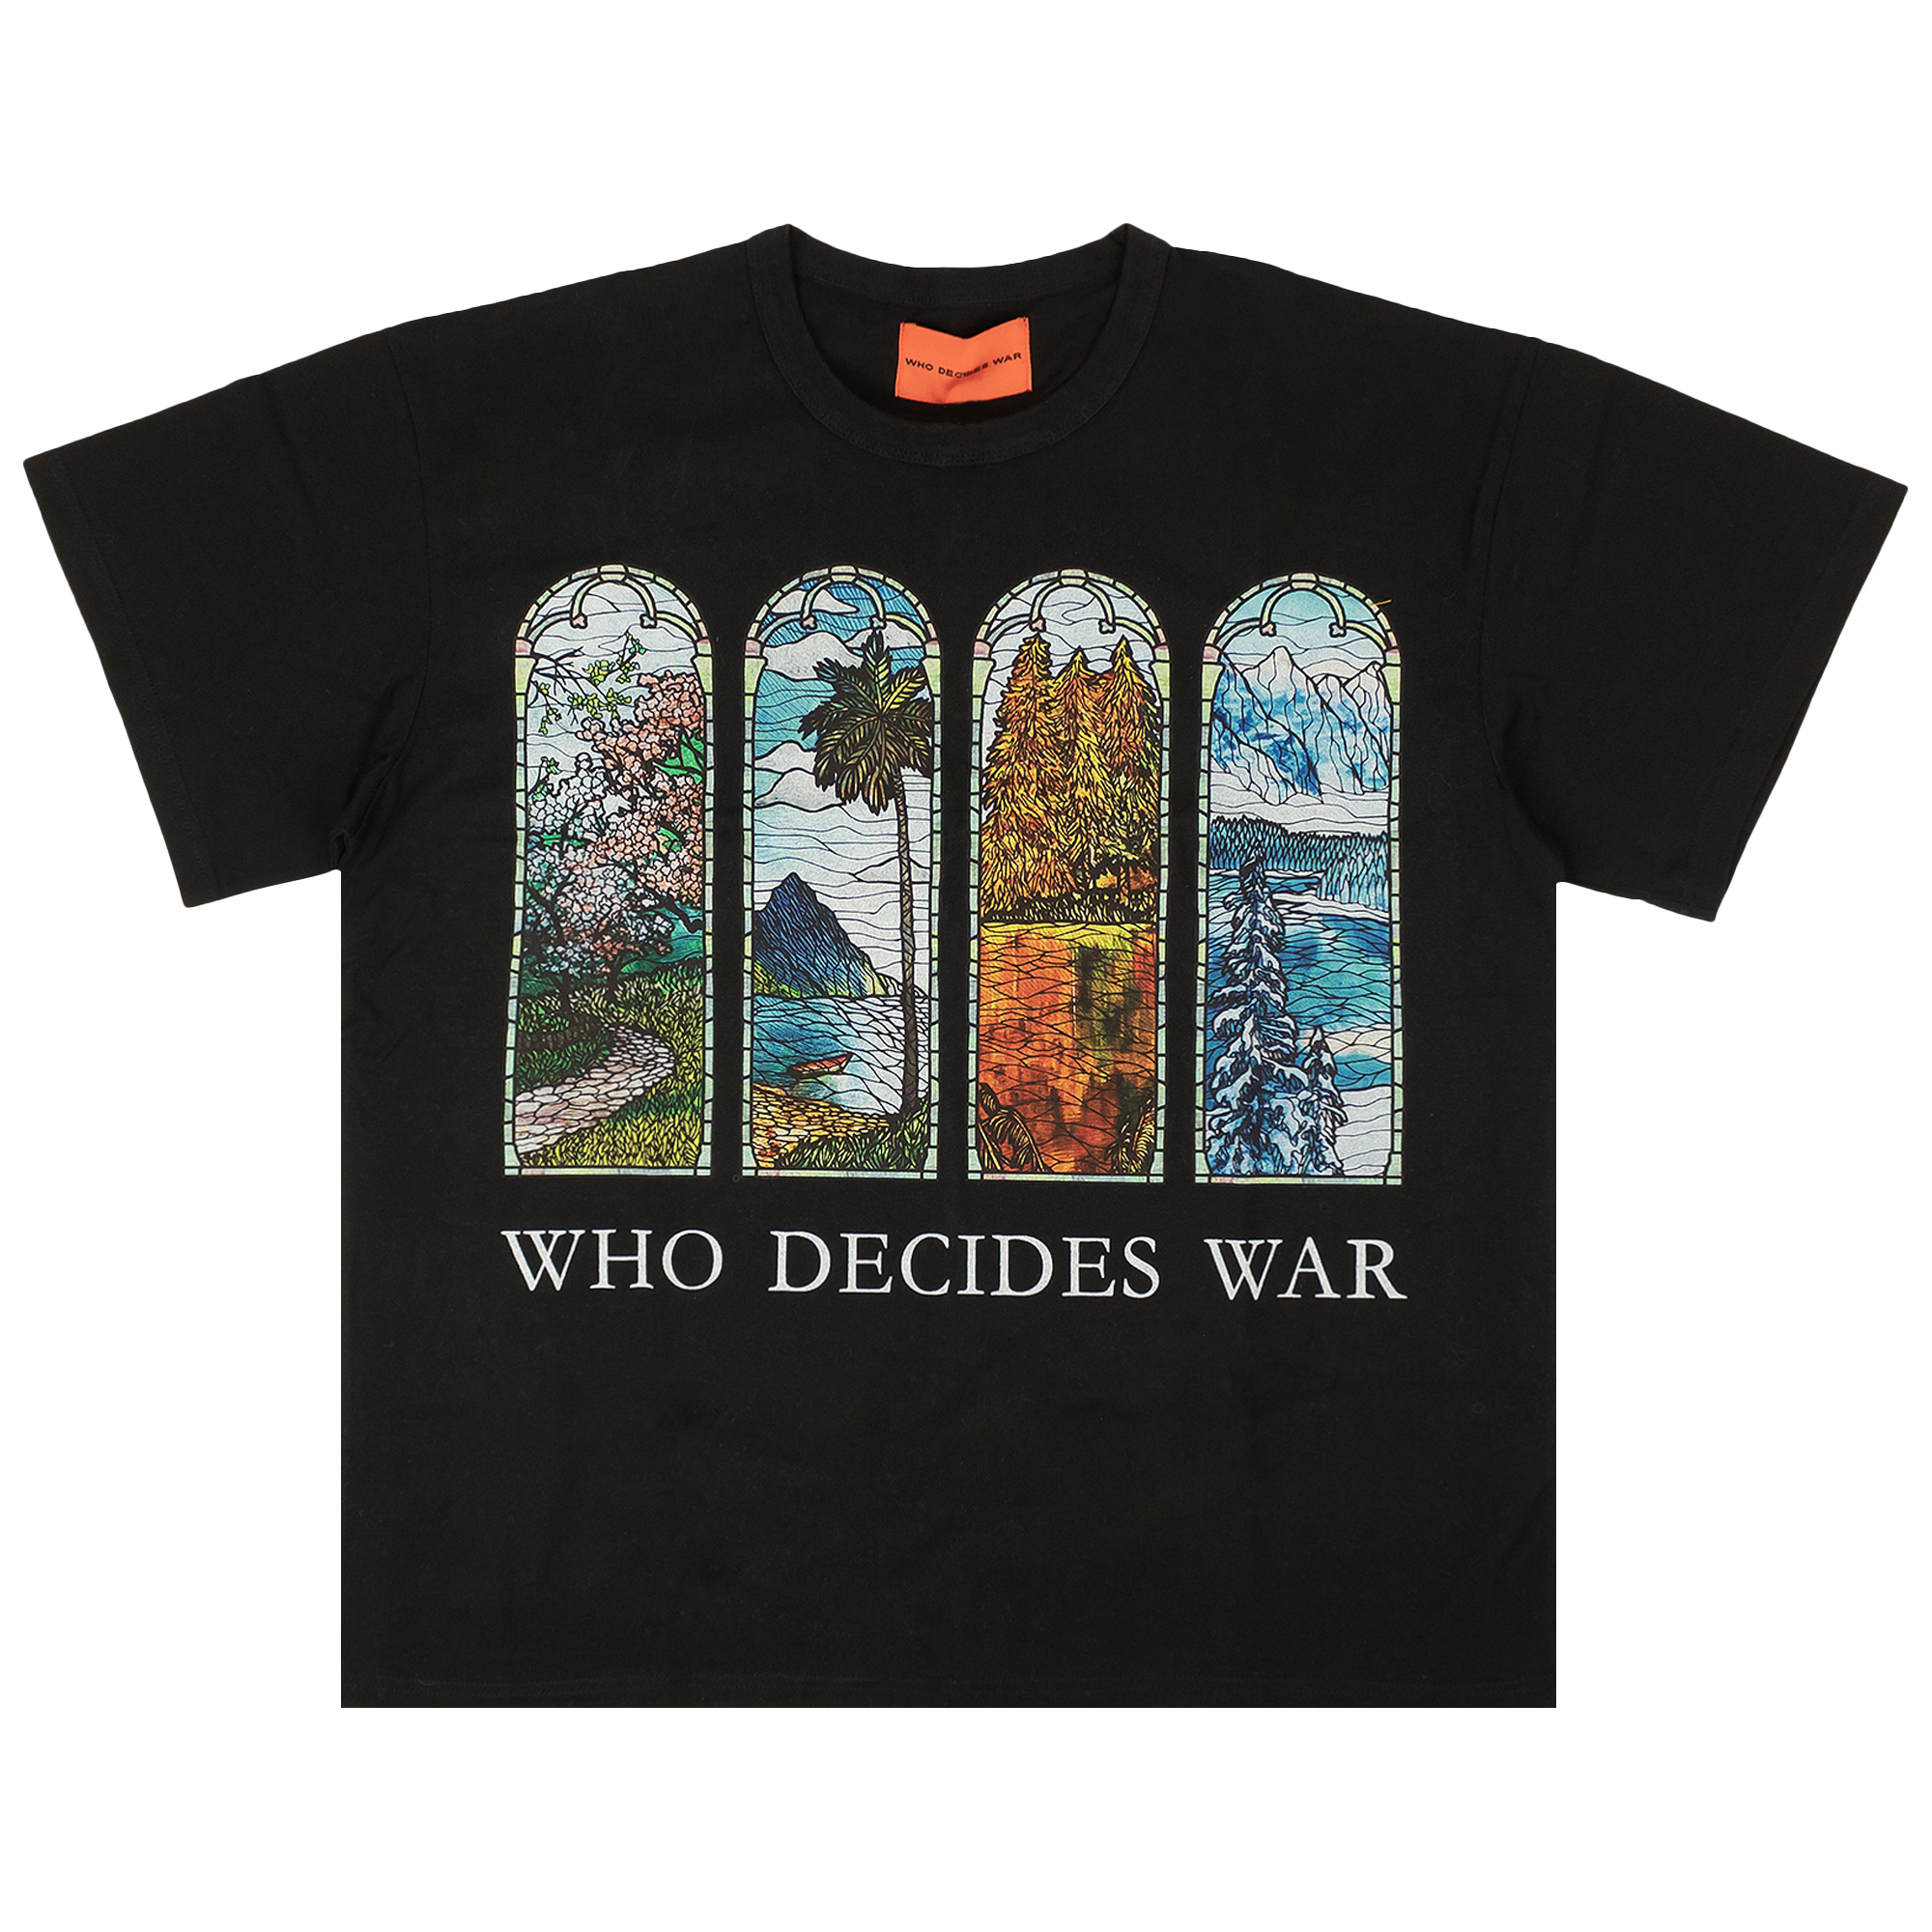 Buy Who Decides War Apparel: Tops, Bottoms & More   GOAT